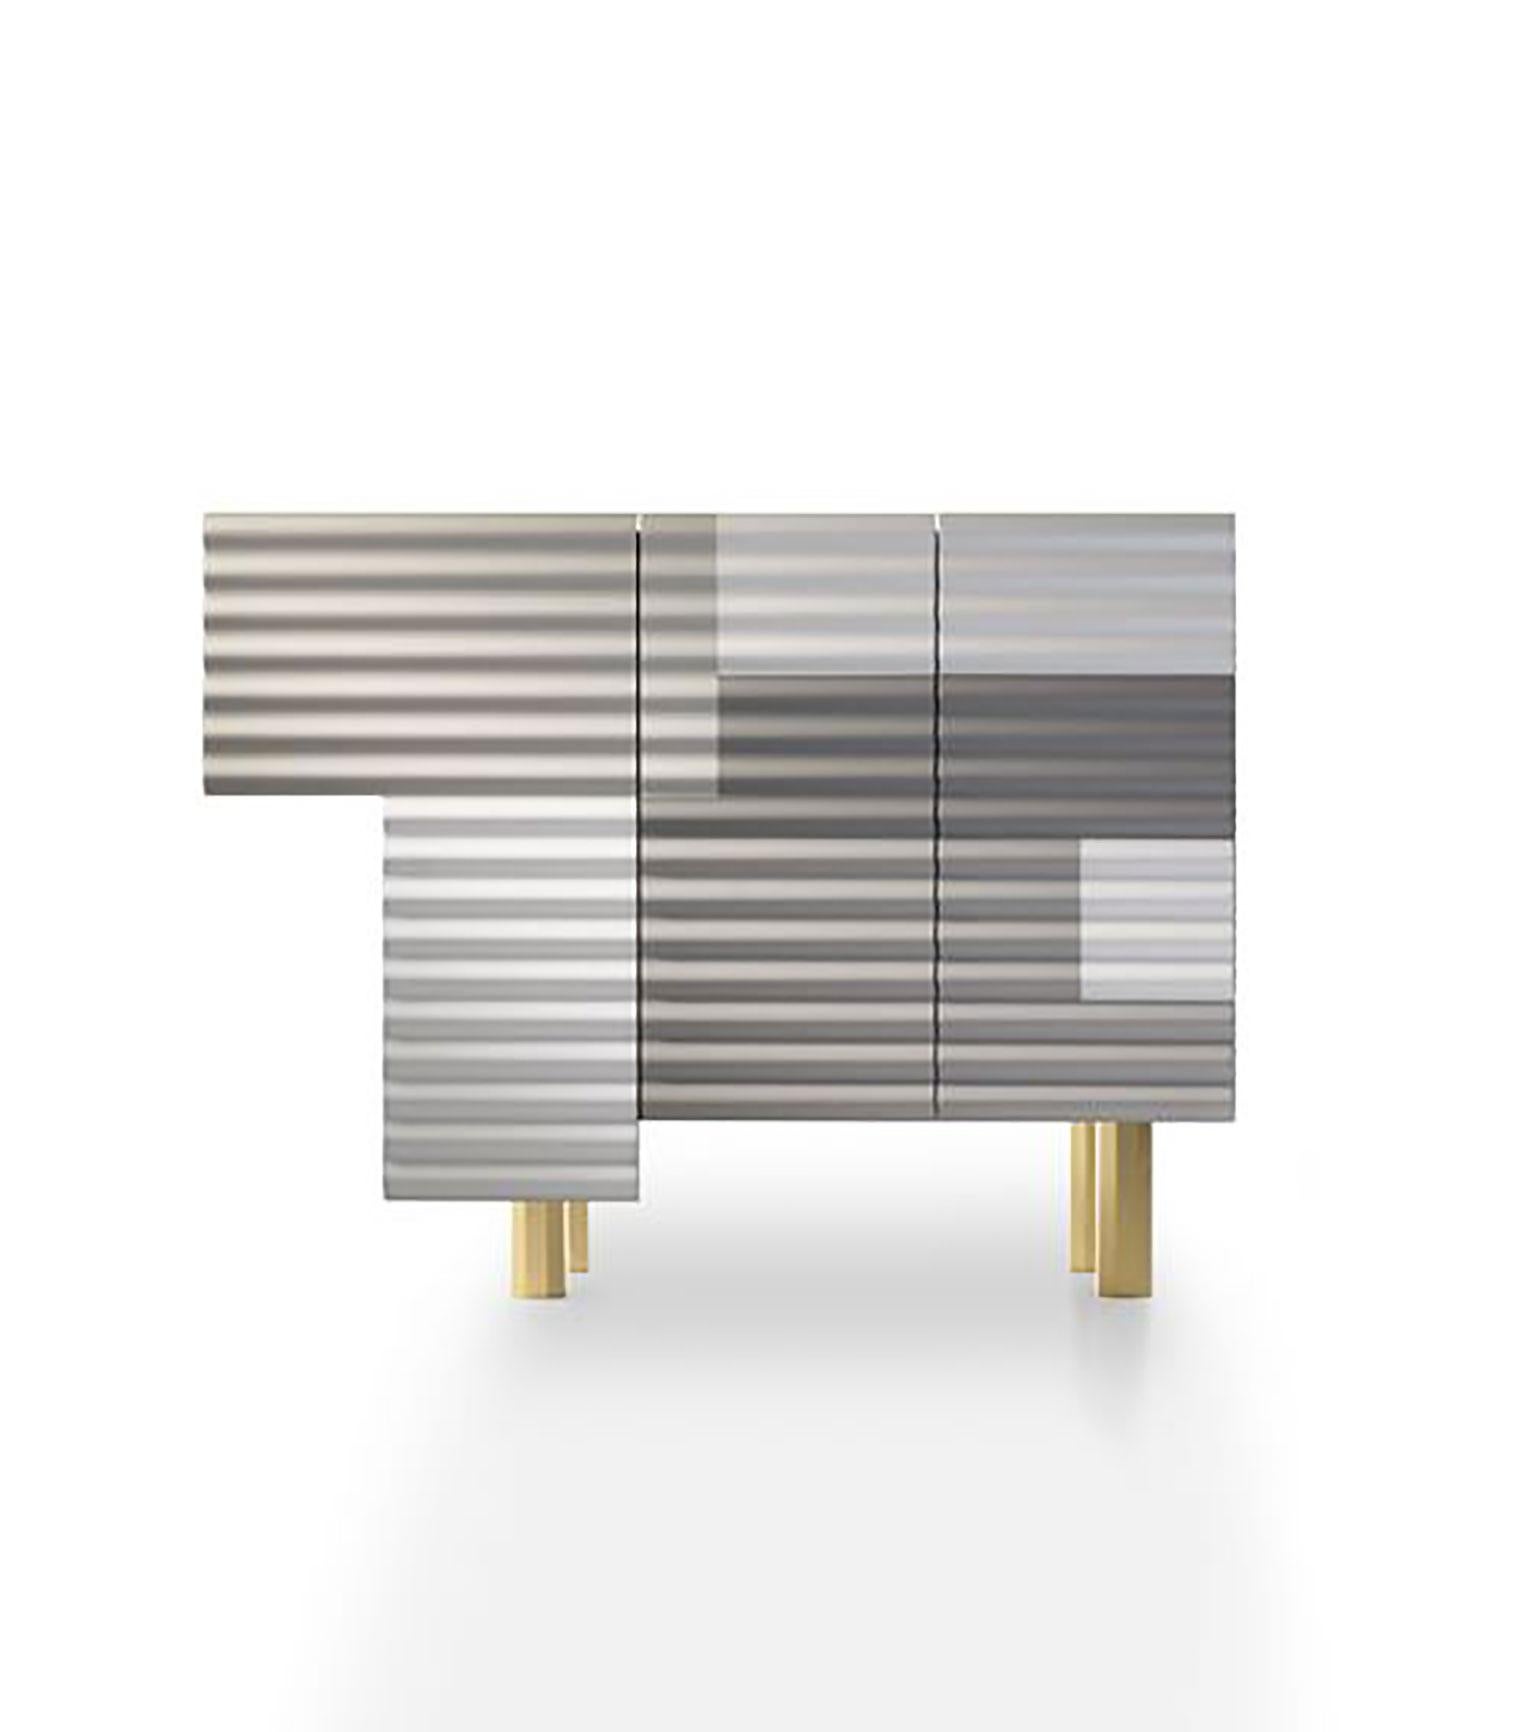 Shanty cabinet designed by Doshi Levien for BD Barcelona. This unique piece is styled after the ridged steel sheets which are utilized to develop numerous brief or temporary homes around the world. This unconstrained arrangement of superimposed